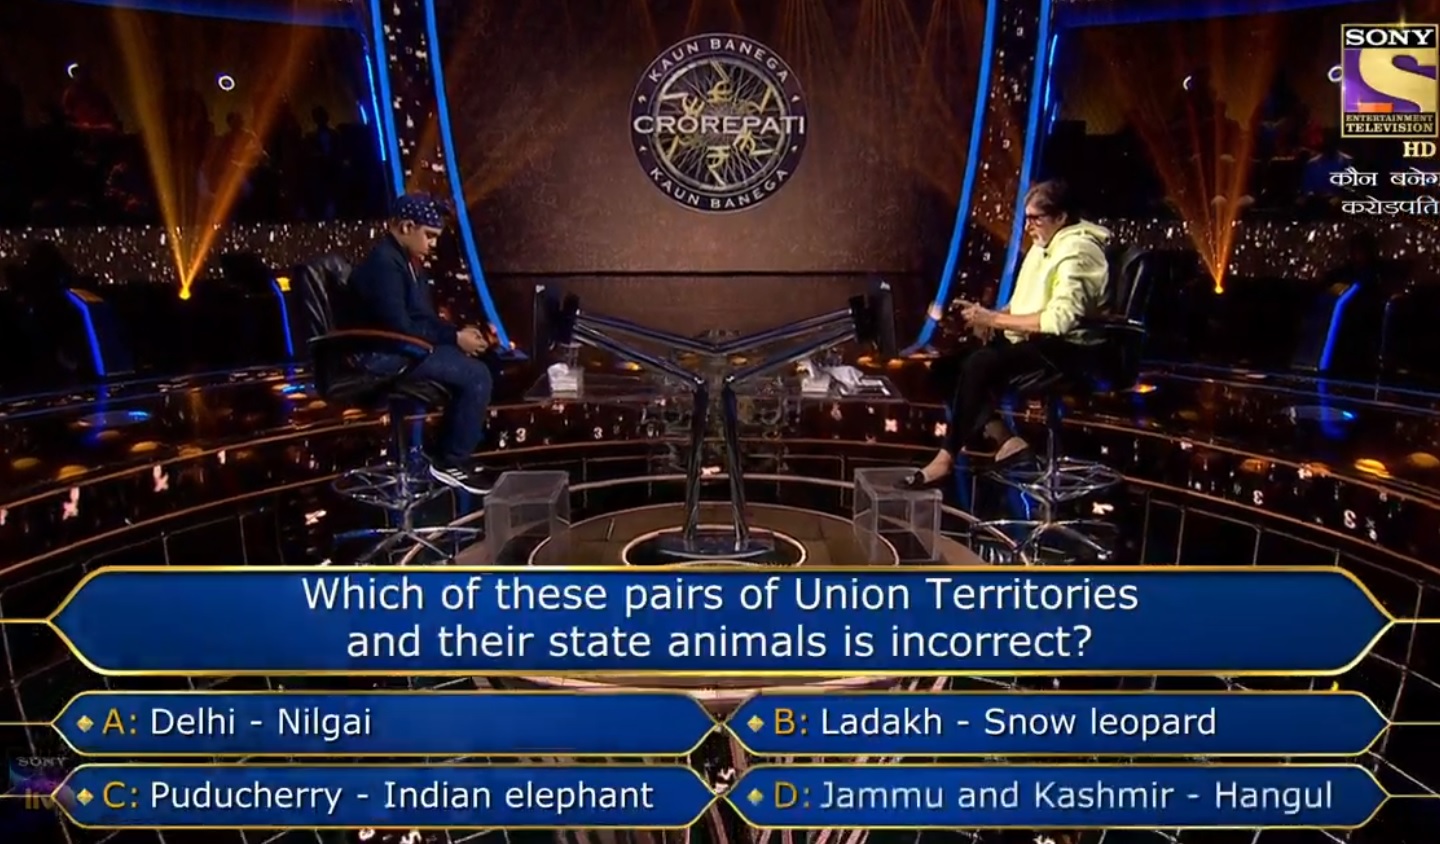 Ques : Which of these pairs of Union Territories and their state animals is incorrect?